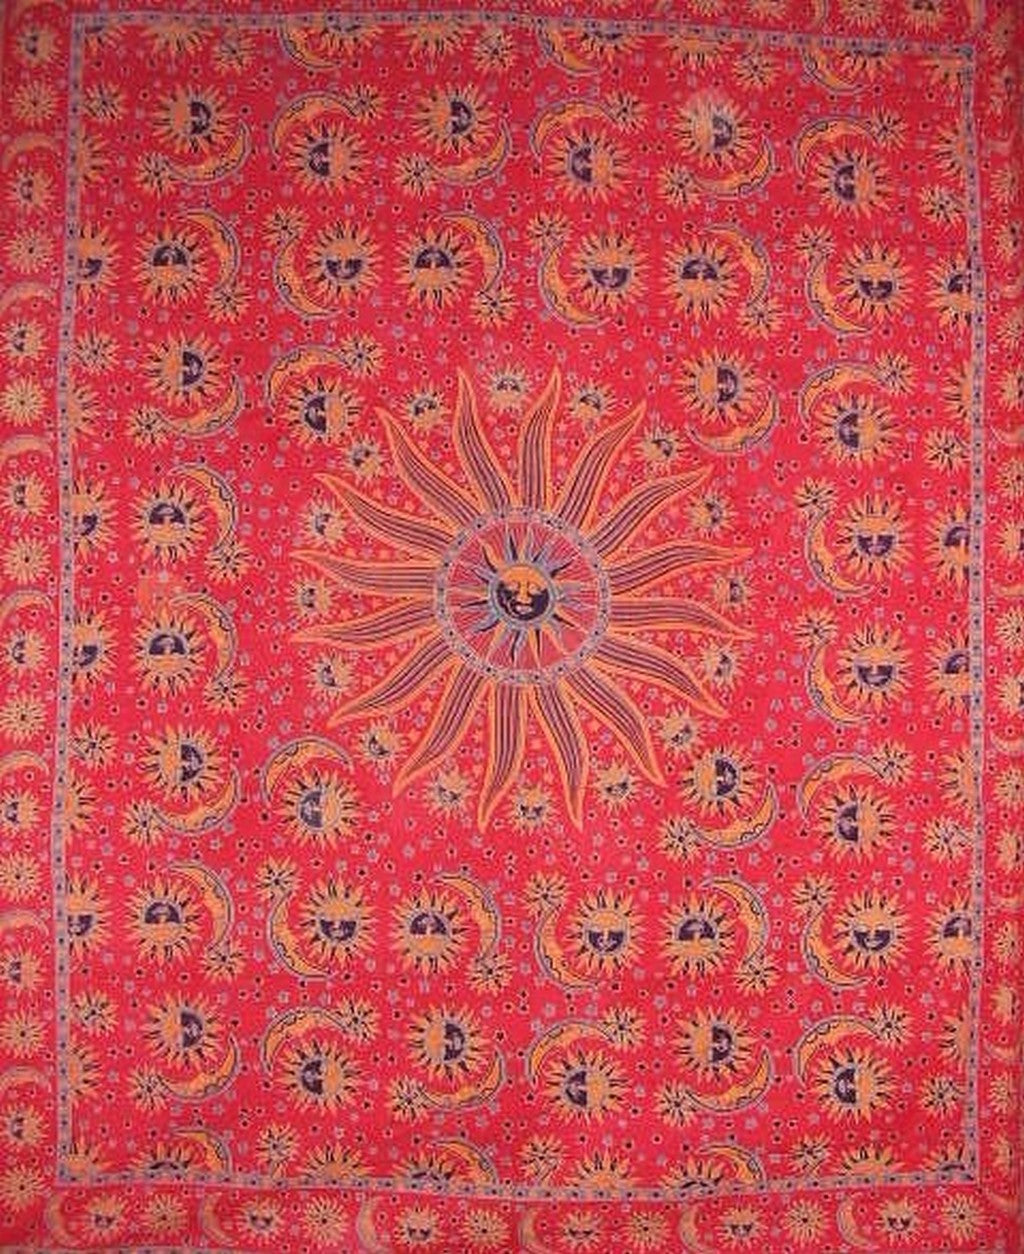 Celestial Tapestry Cotton Bedspread 108" x 88" Full-Queen Red